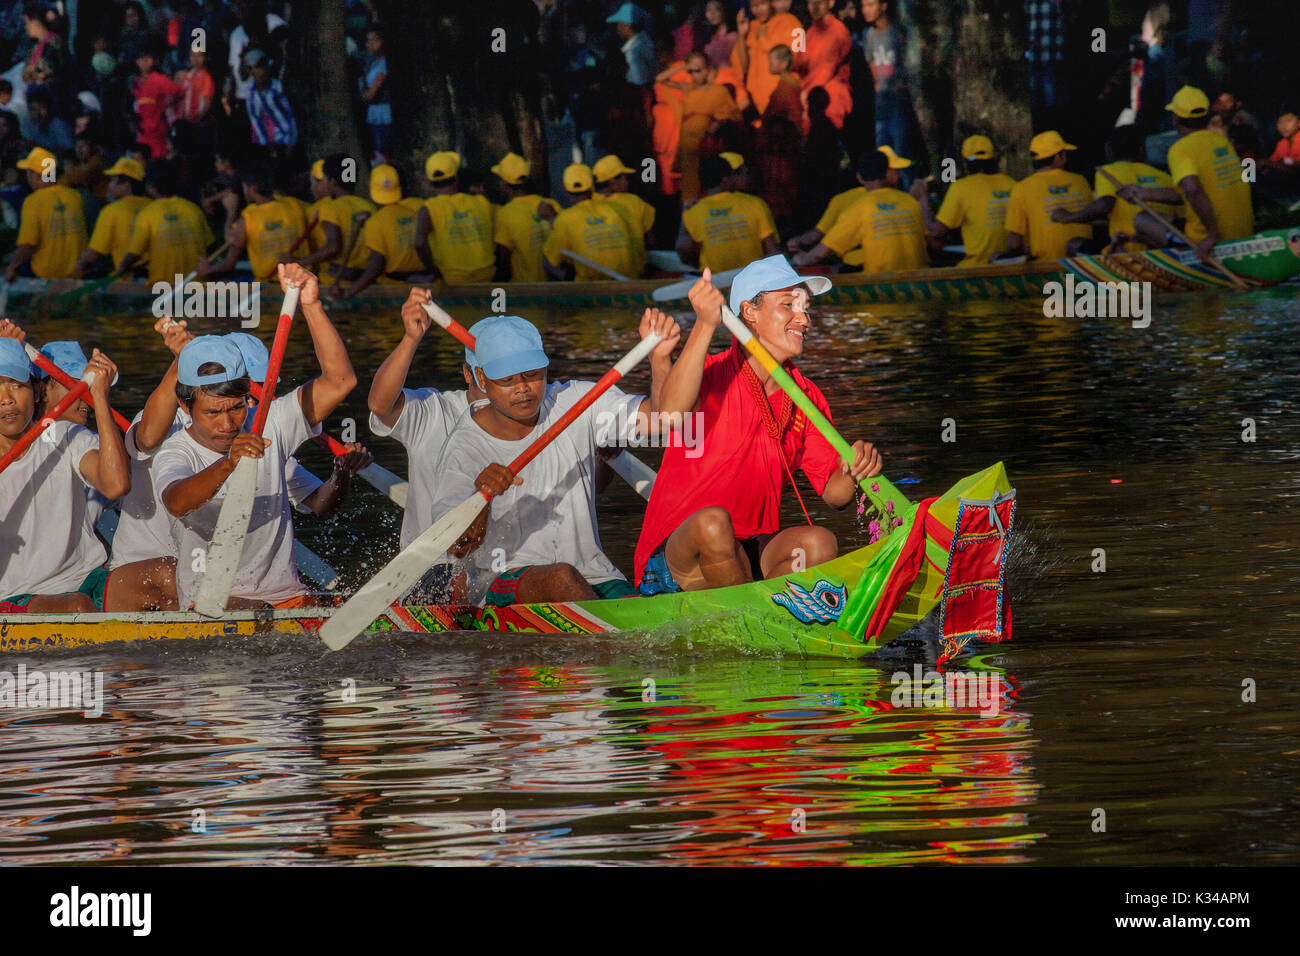 Dragon boat festival race at the Water Festival, Bon Om Touk, on the Tonle Sap River in Siem Reap, Cambodia. Stock Photo